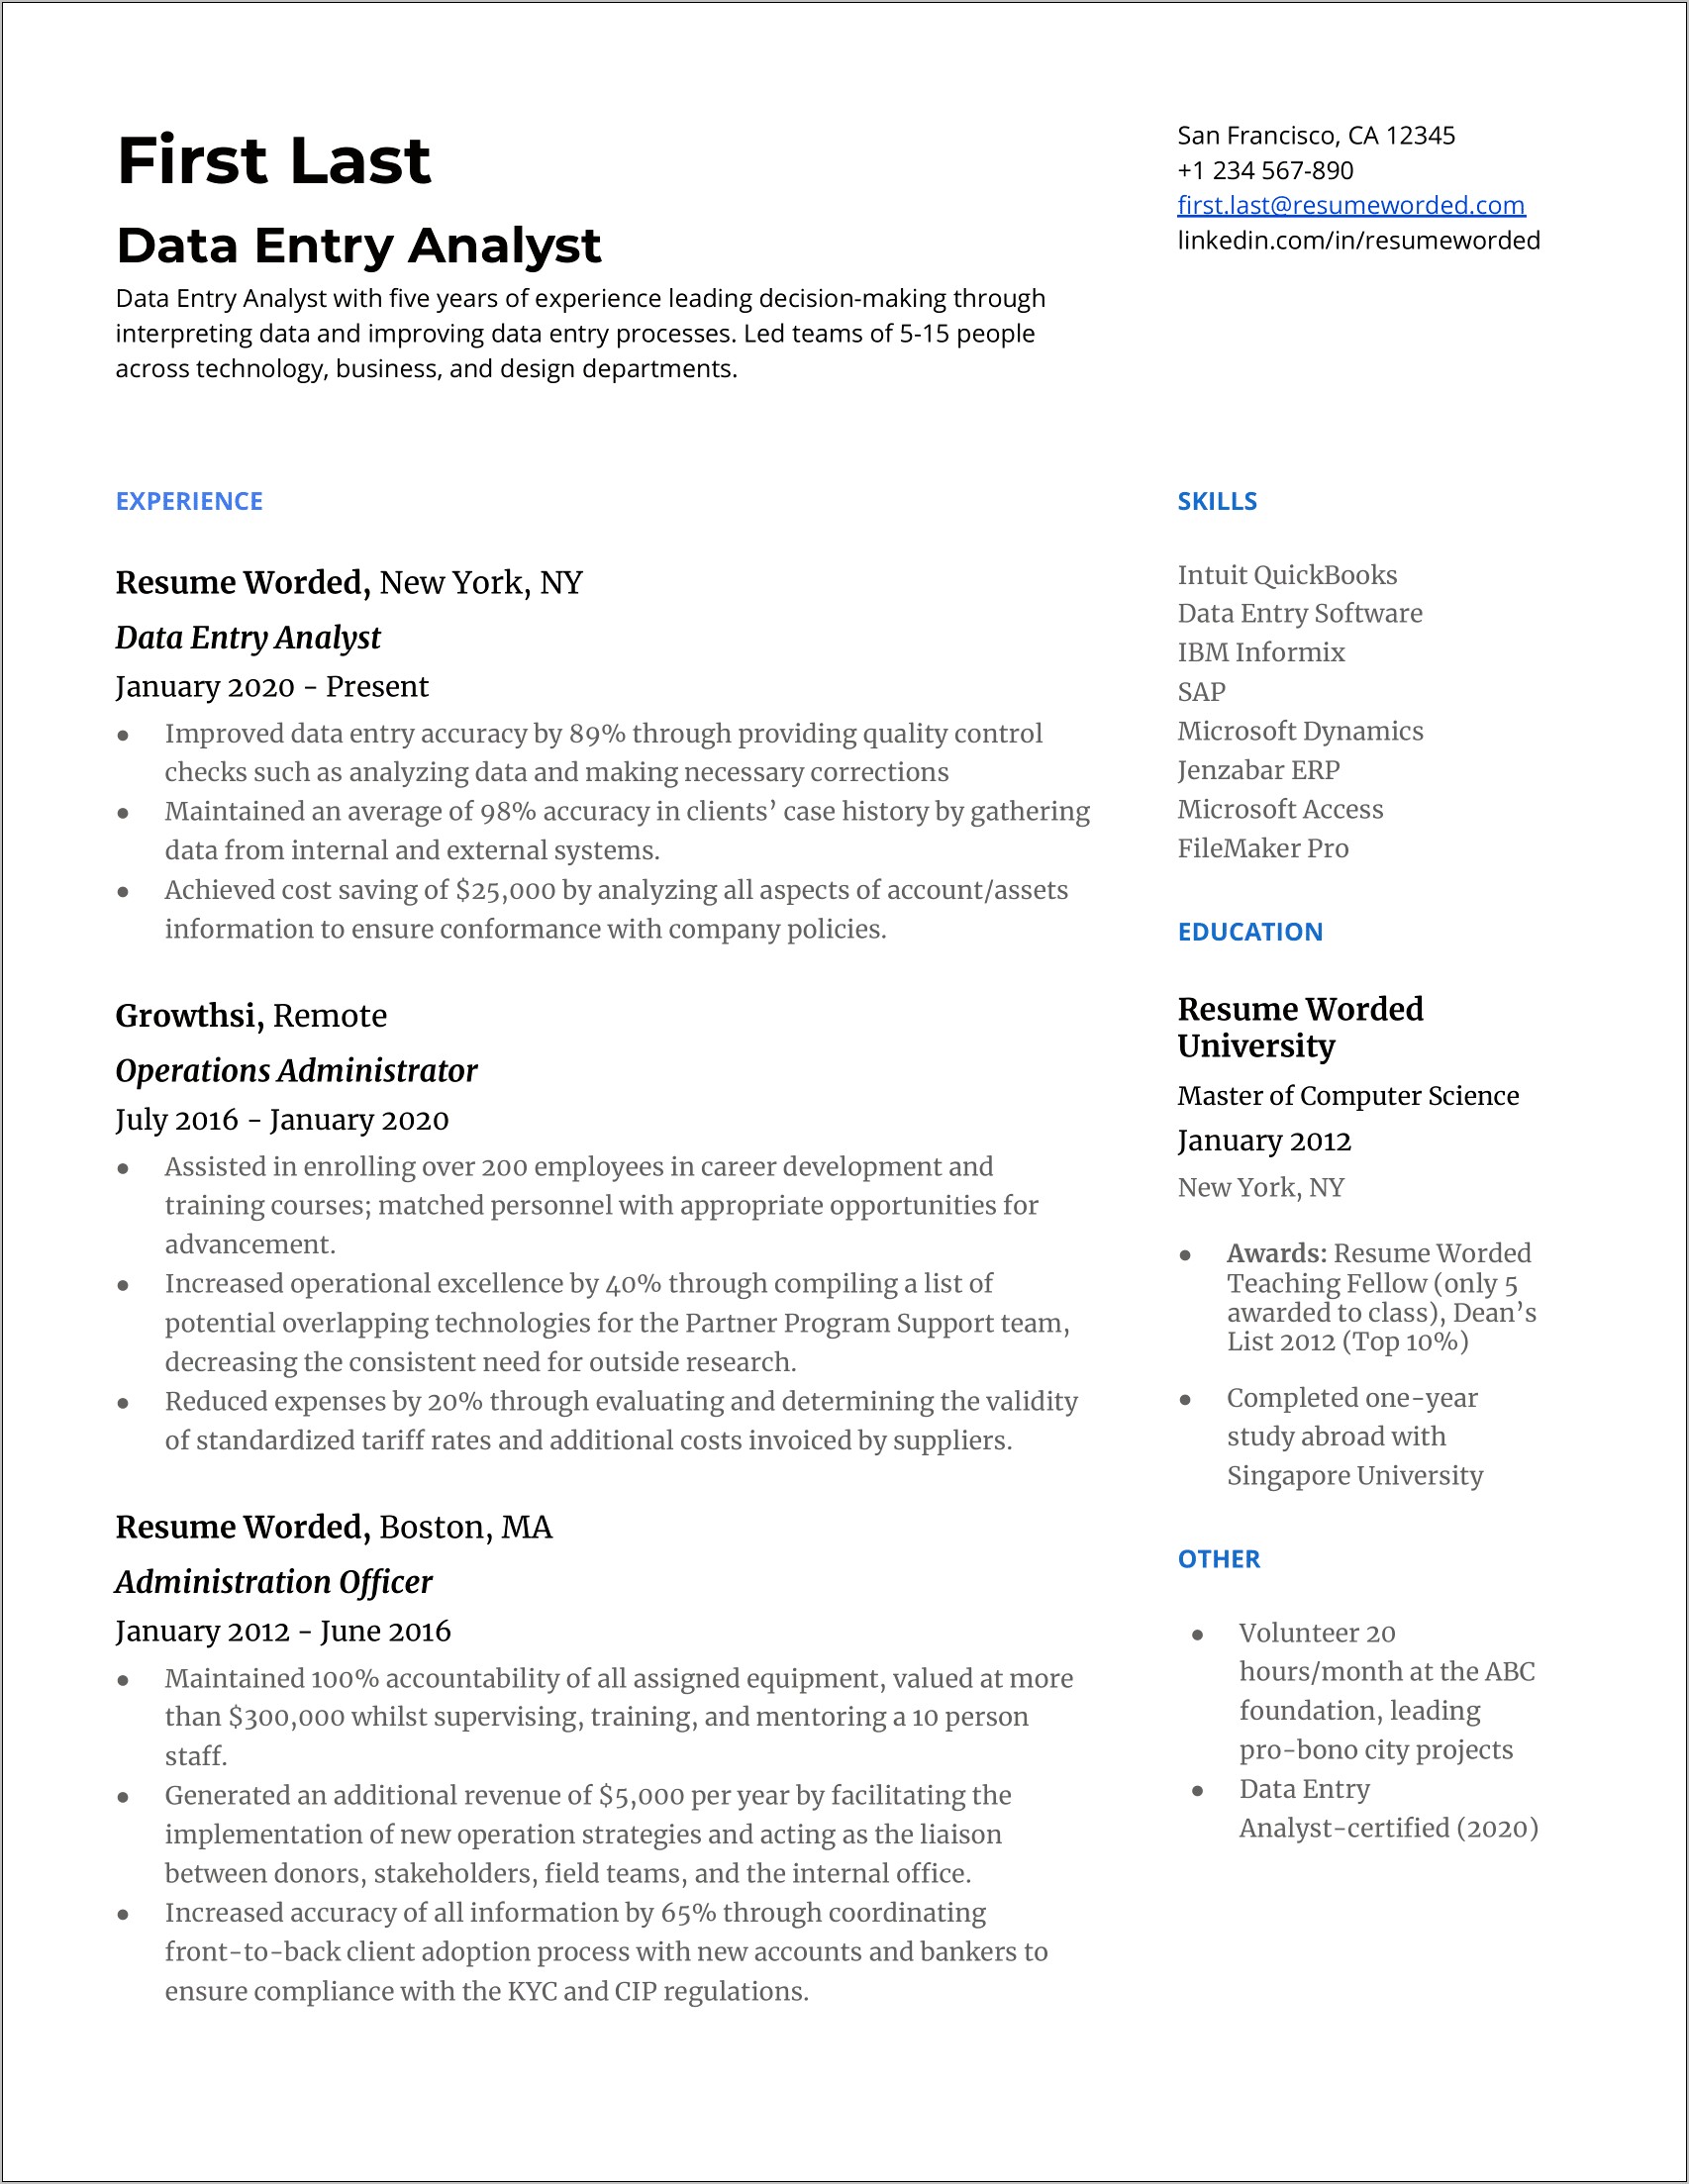 Data Entry Resume Sample With Experience